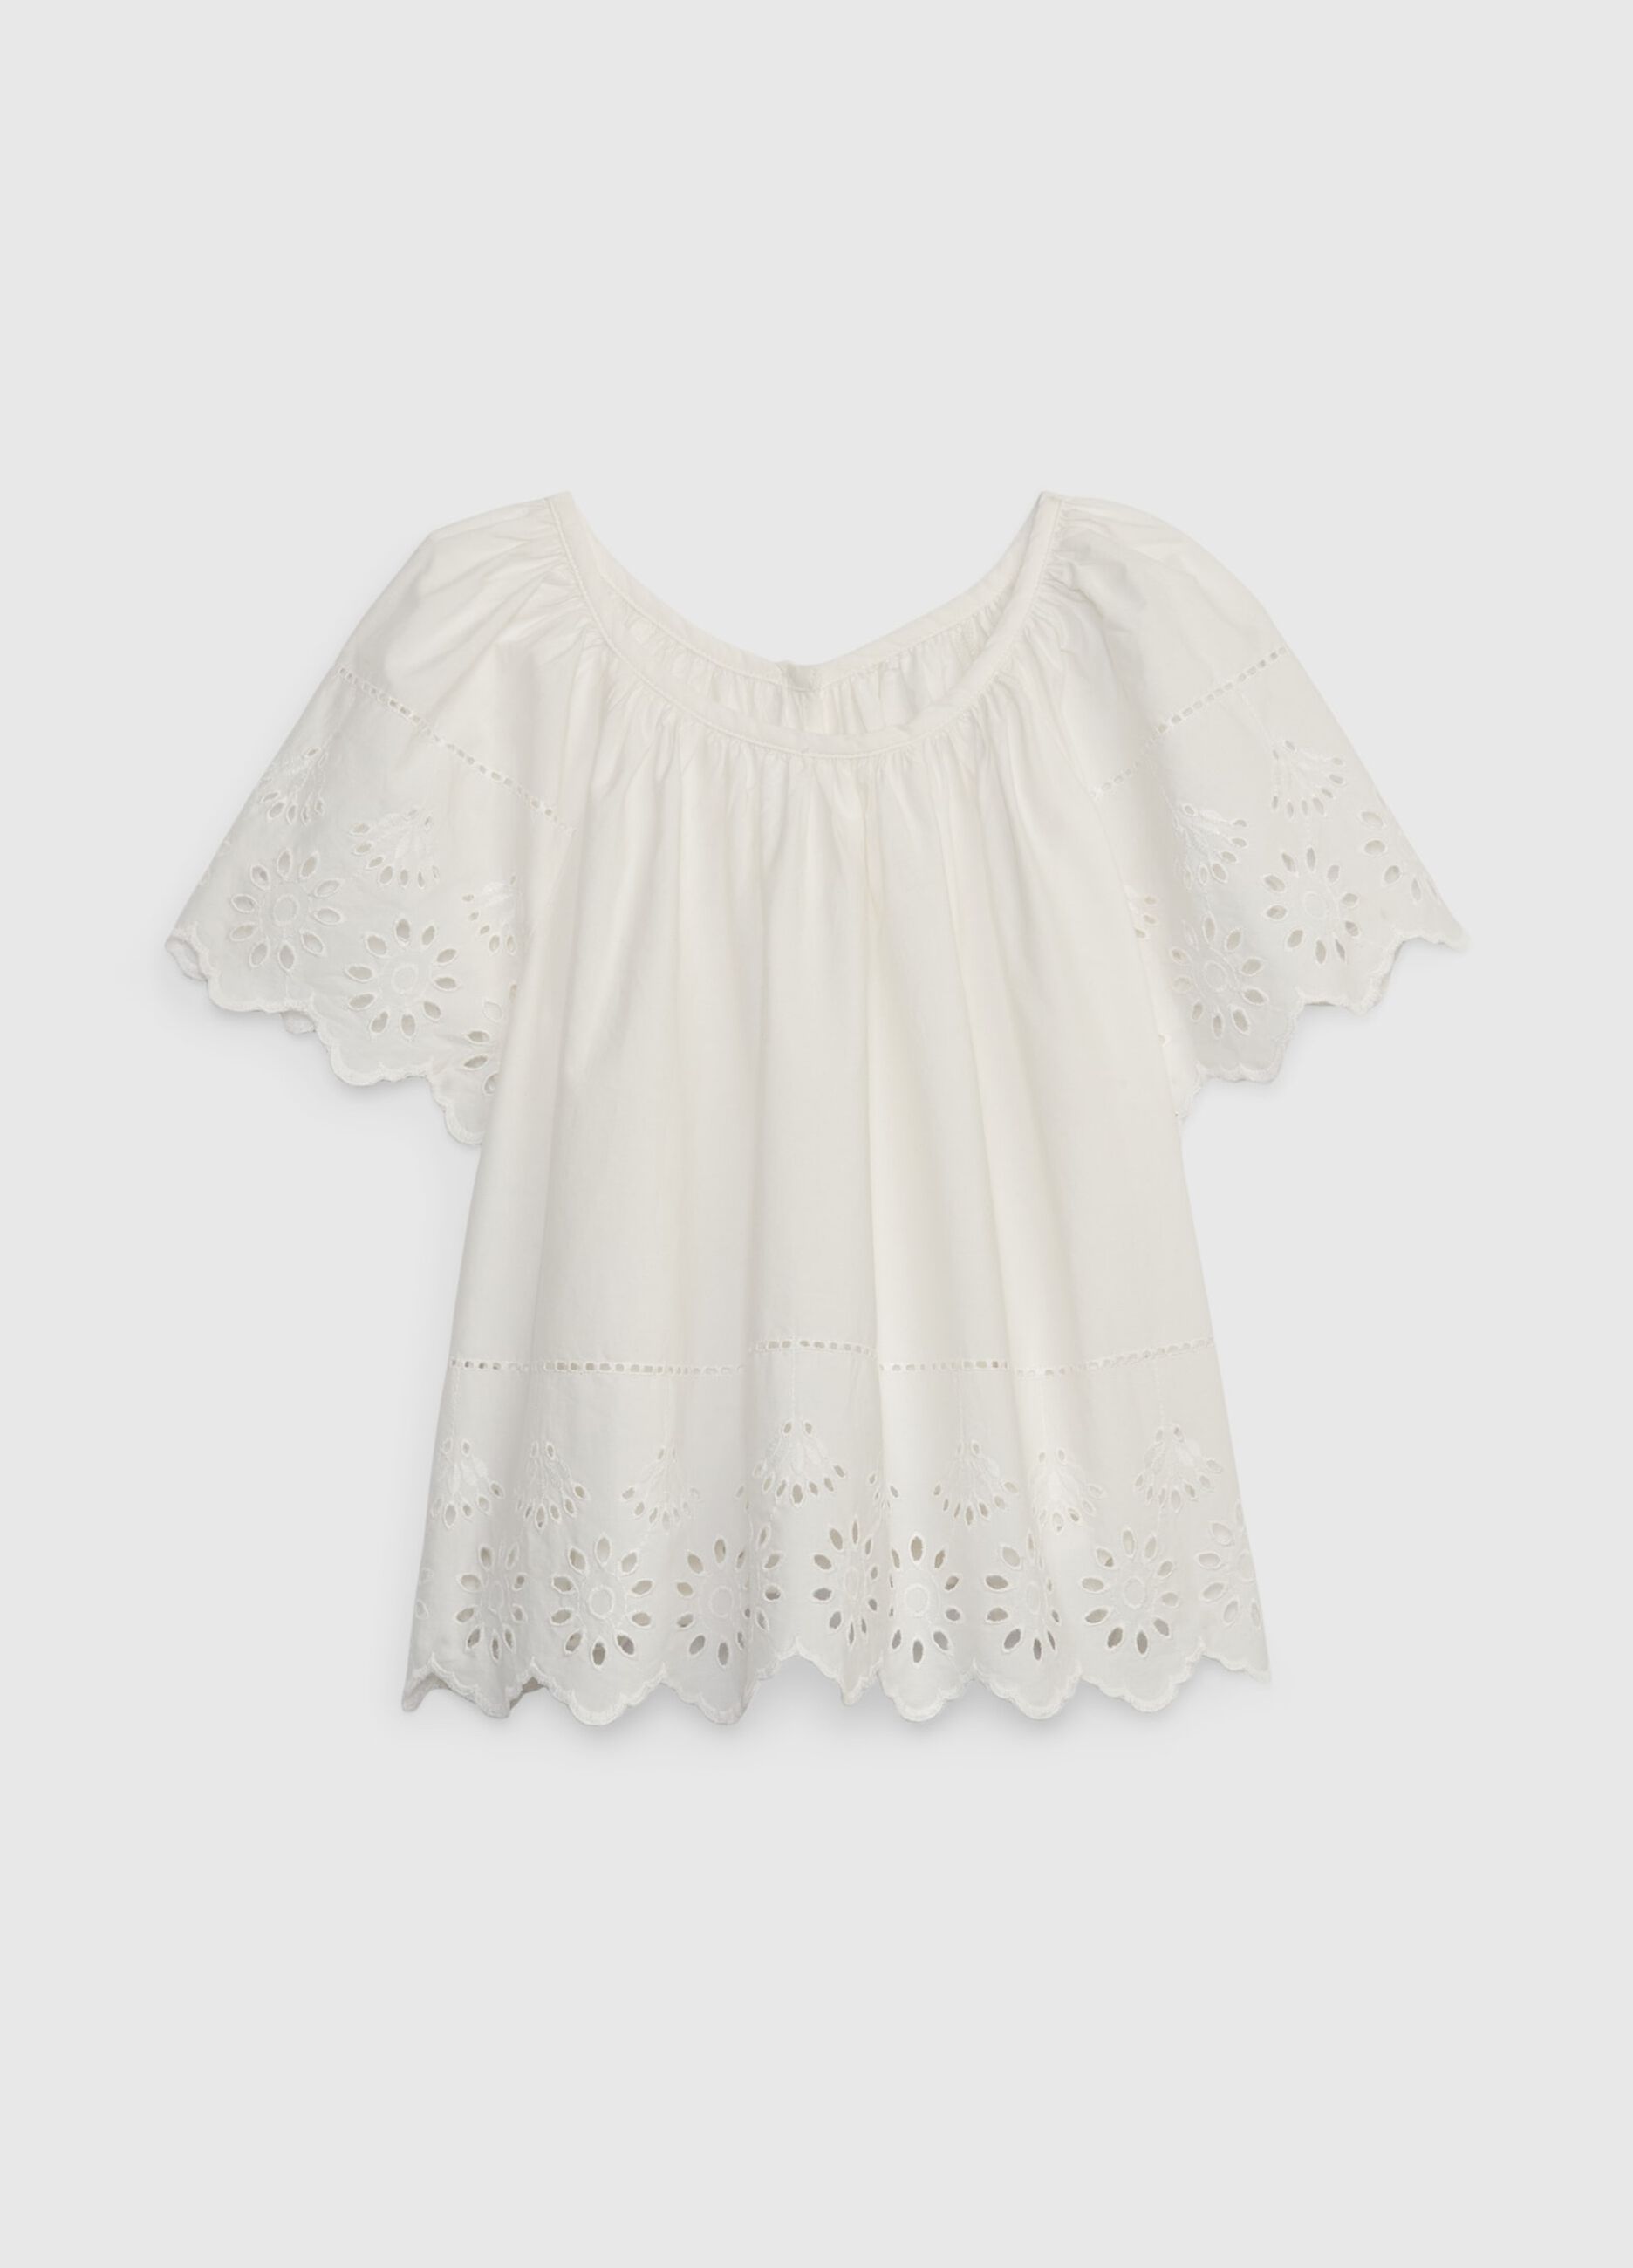 Blouse with broderie anglaise trim